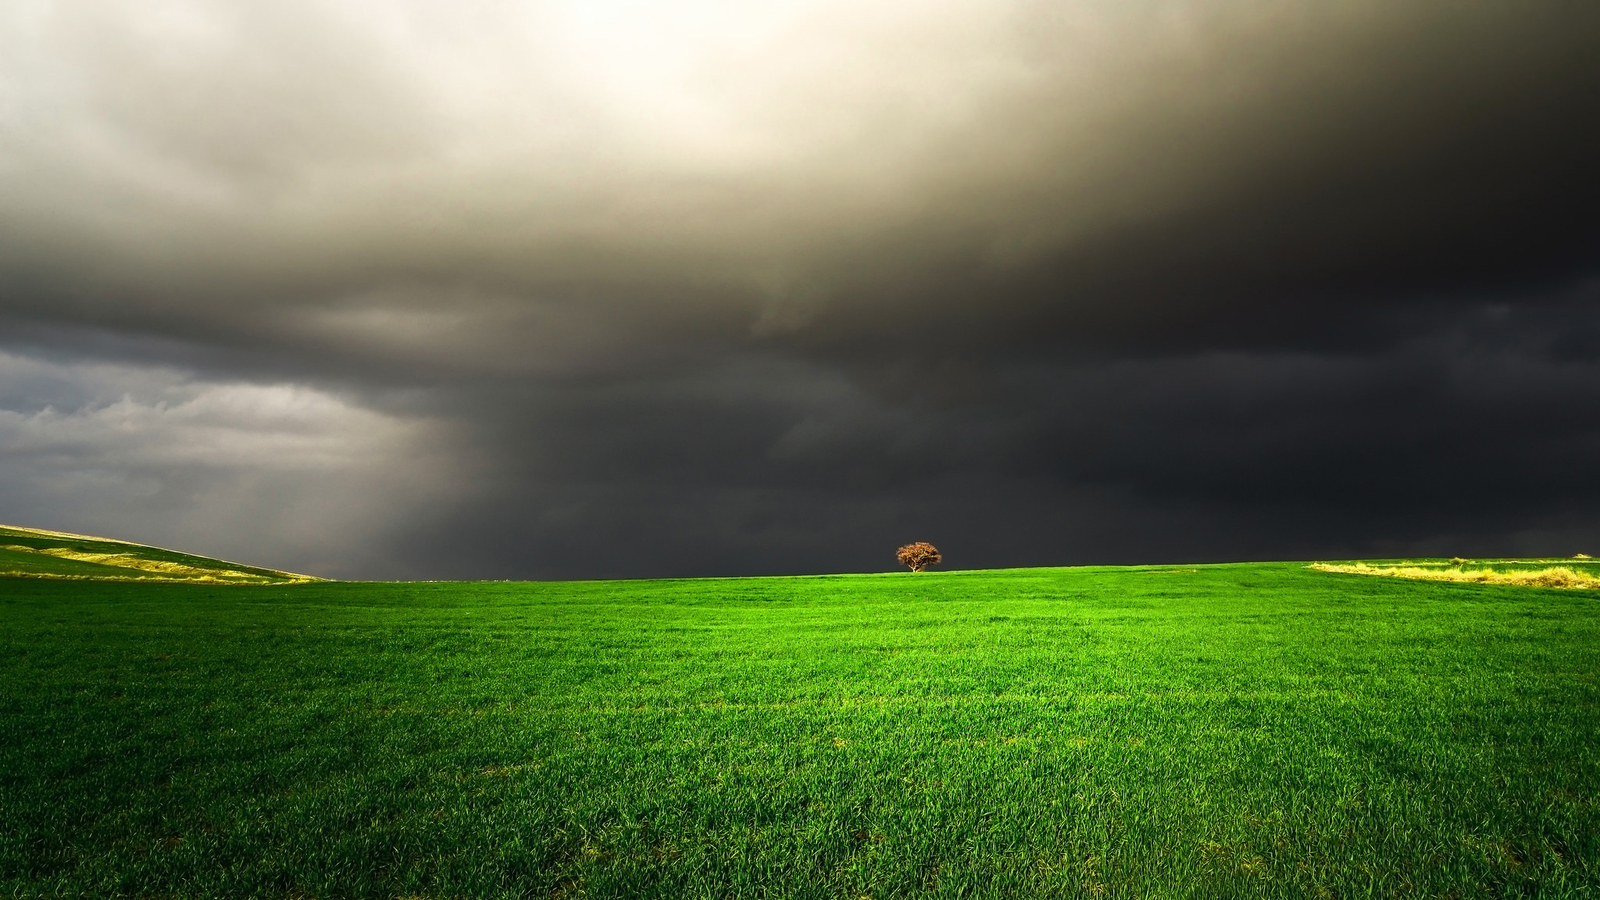 Before the storm - Nature, beauty, Thunderstorm, Field